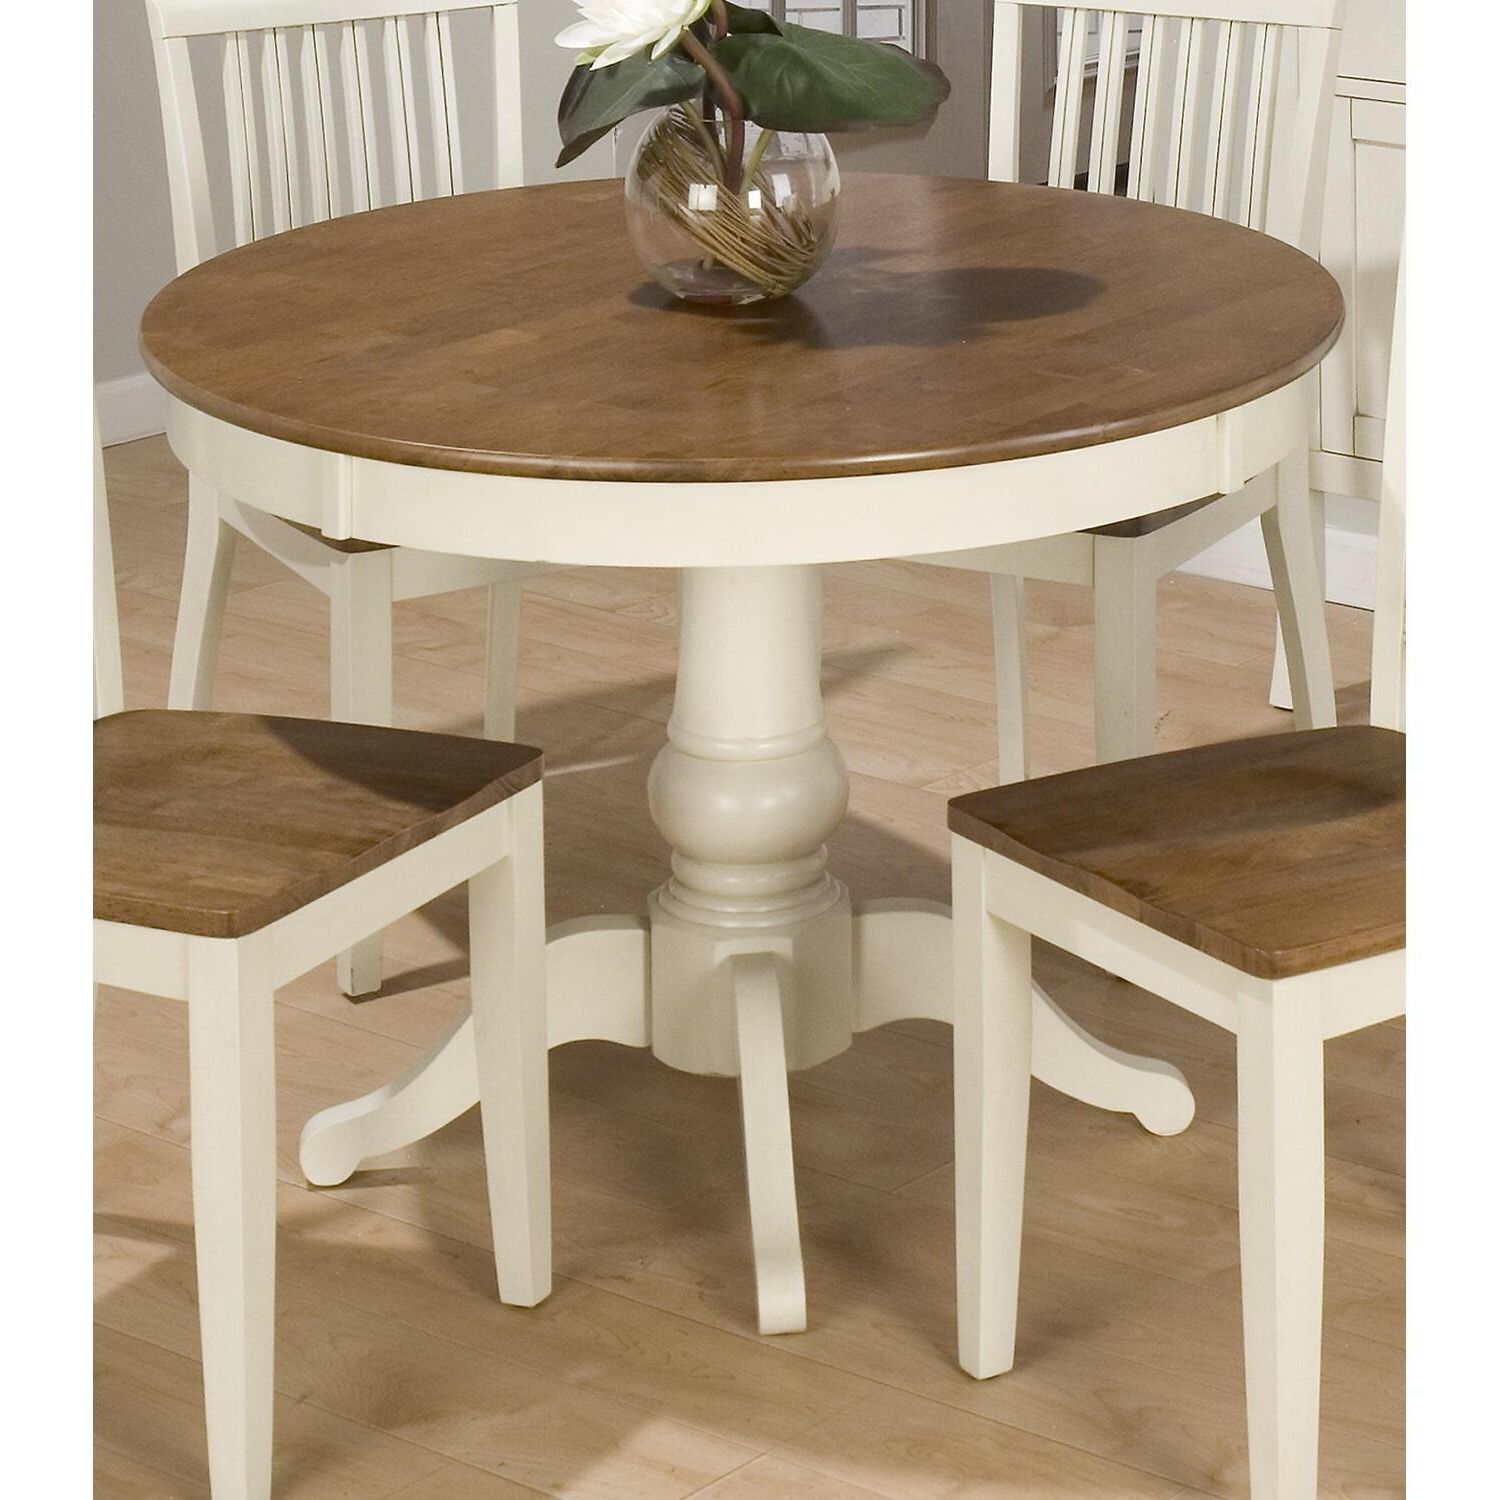 Classic Dining Tables In Widely Used Jofran Antique Honey / Vintage White Finished 42" Round (View 13 of 20)